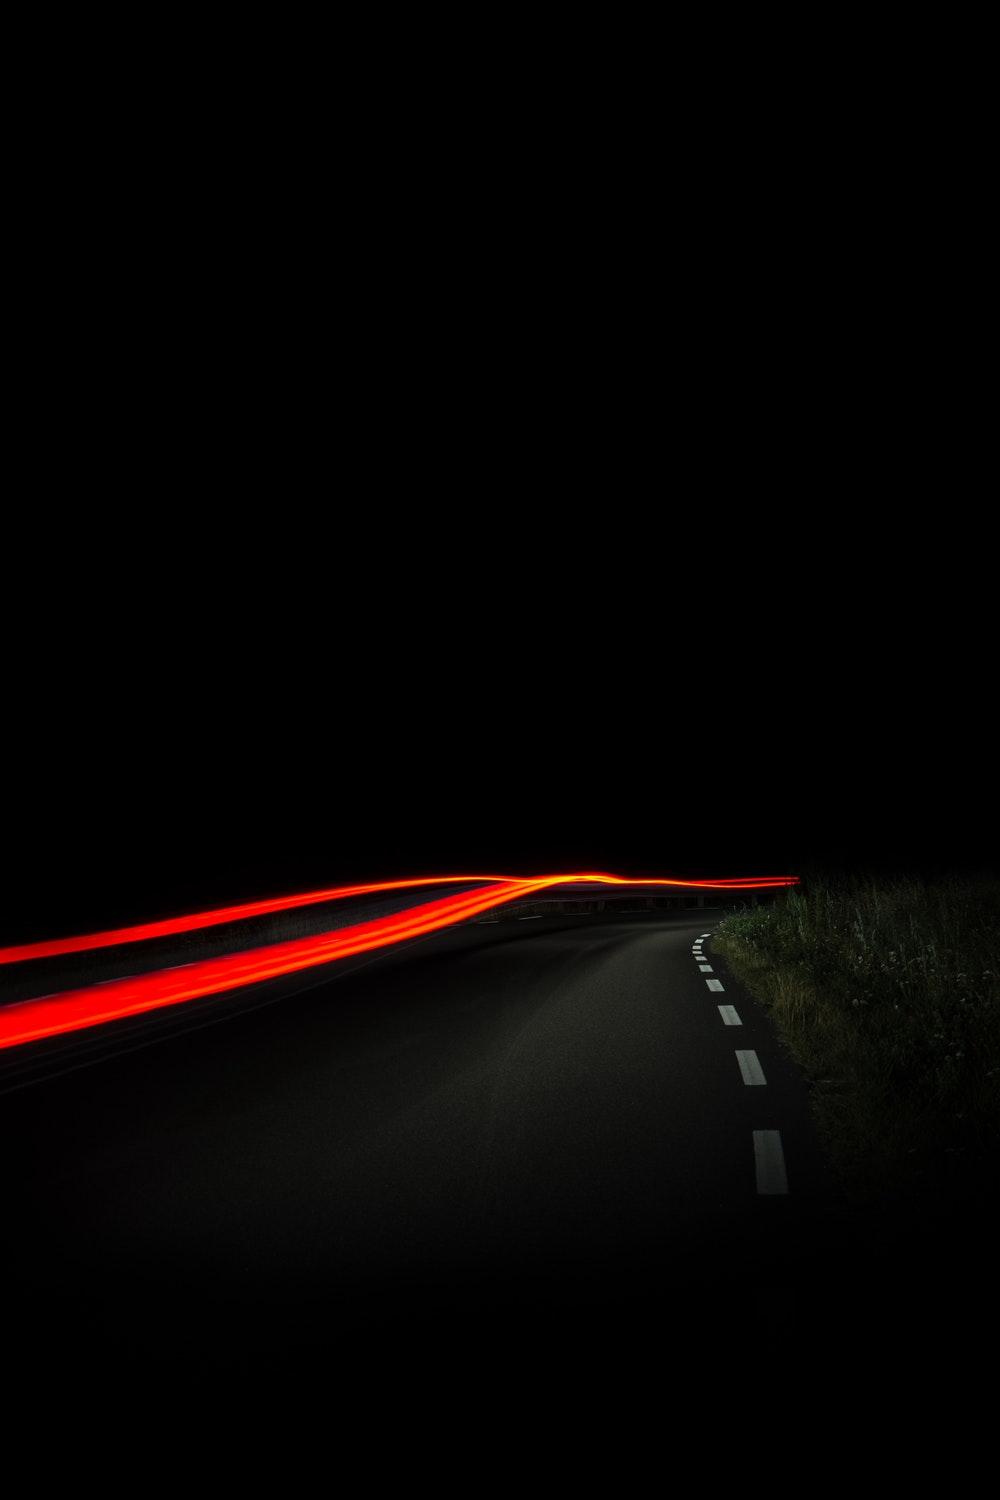 Night Drive Picture. Download Free Image